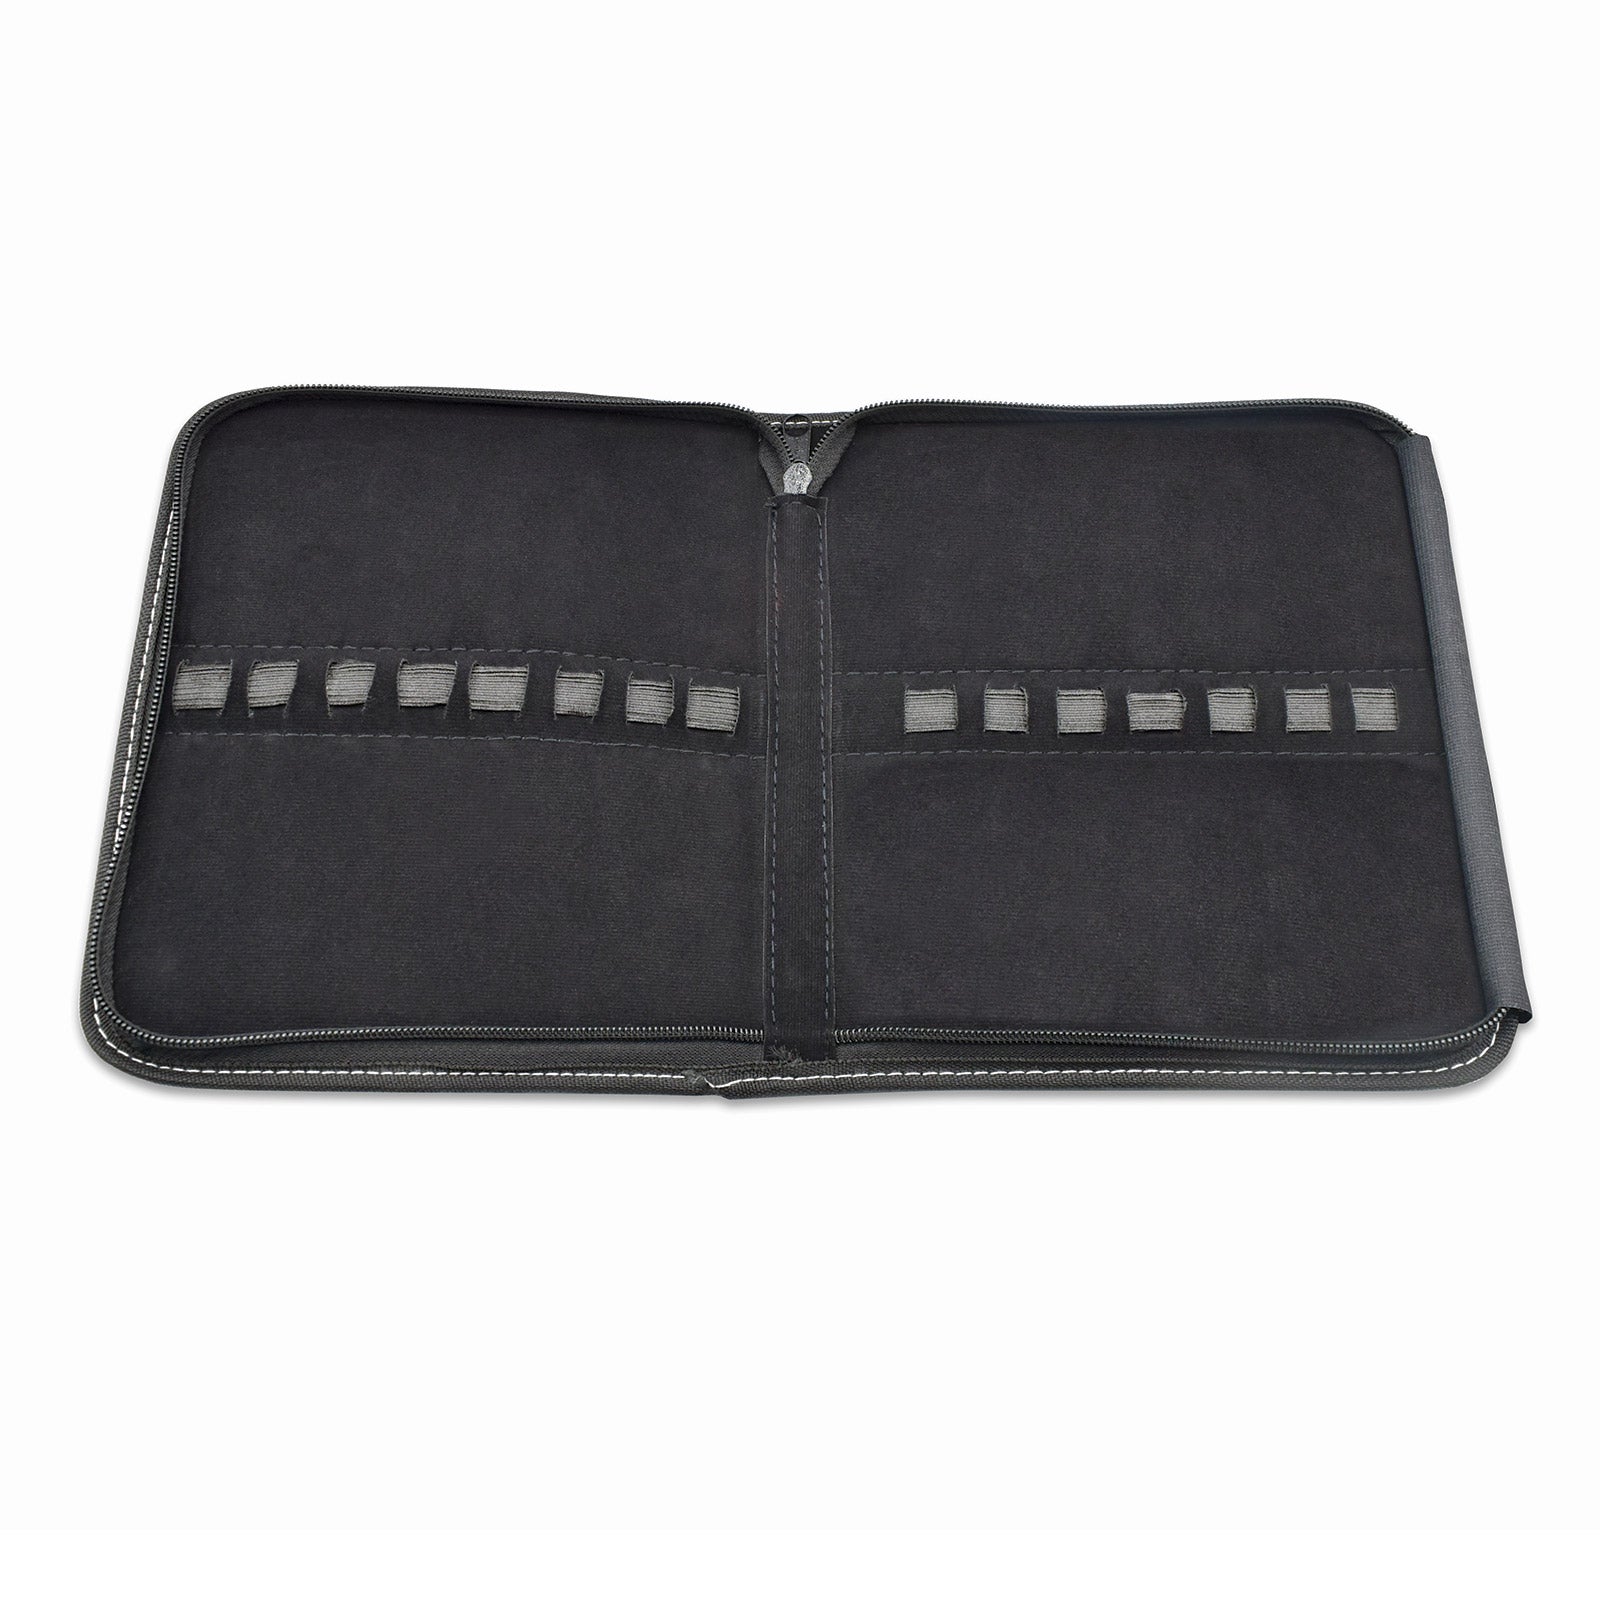 Micro - Mark Specialty Tool Protective Case